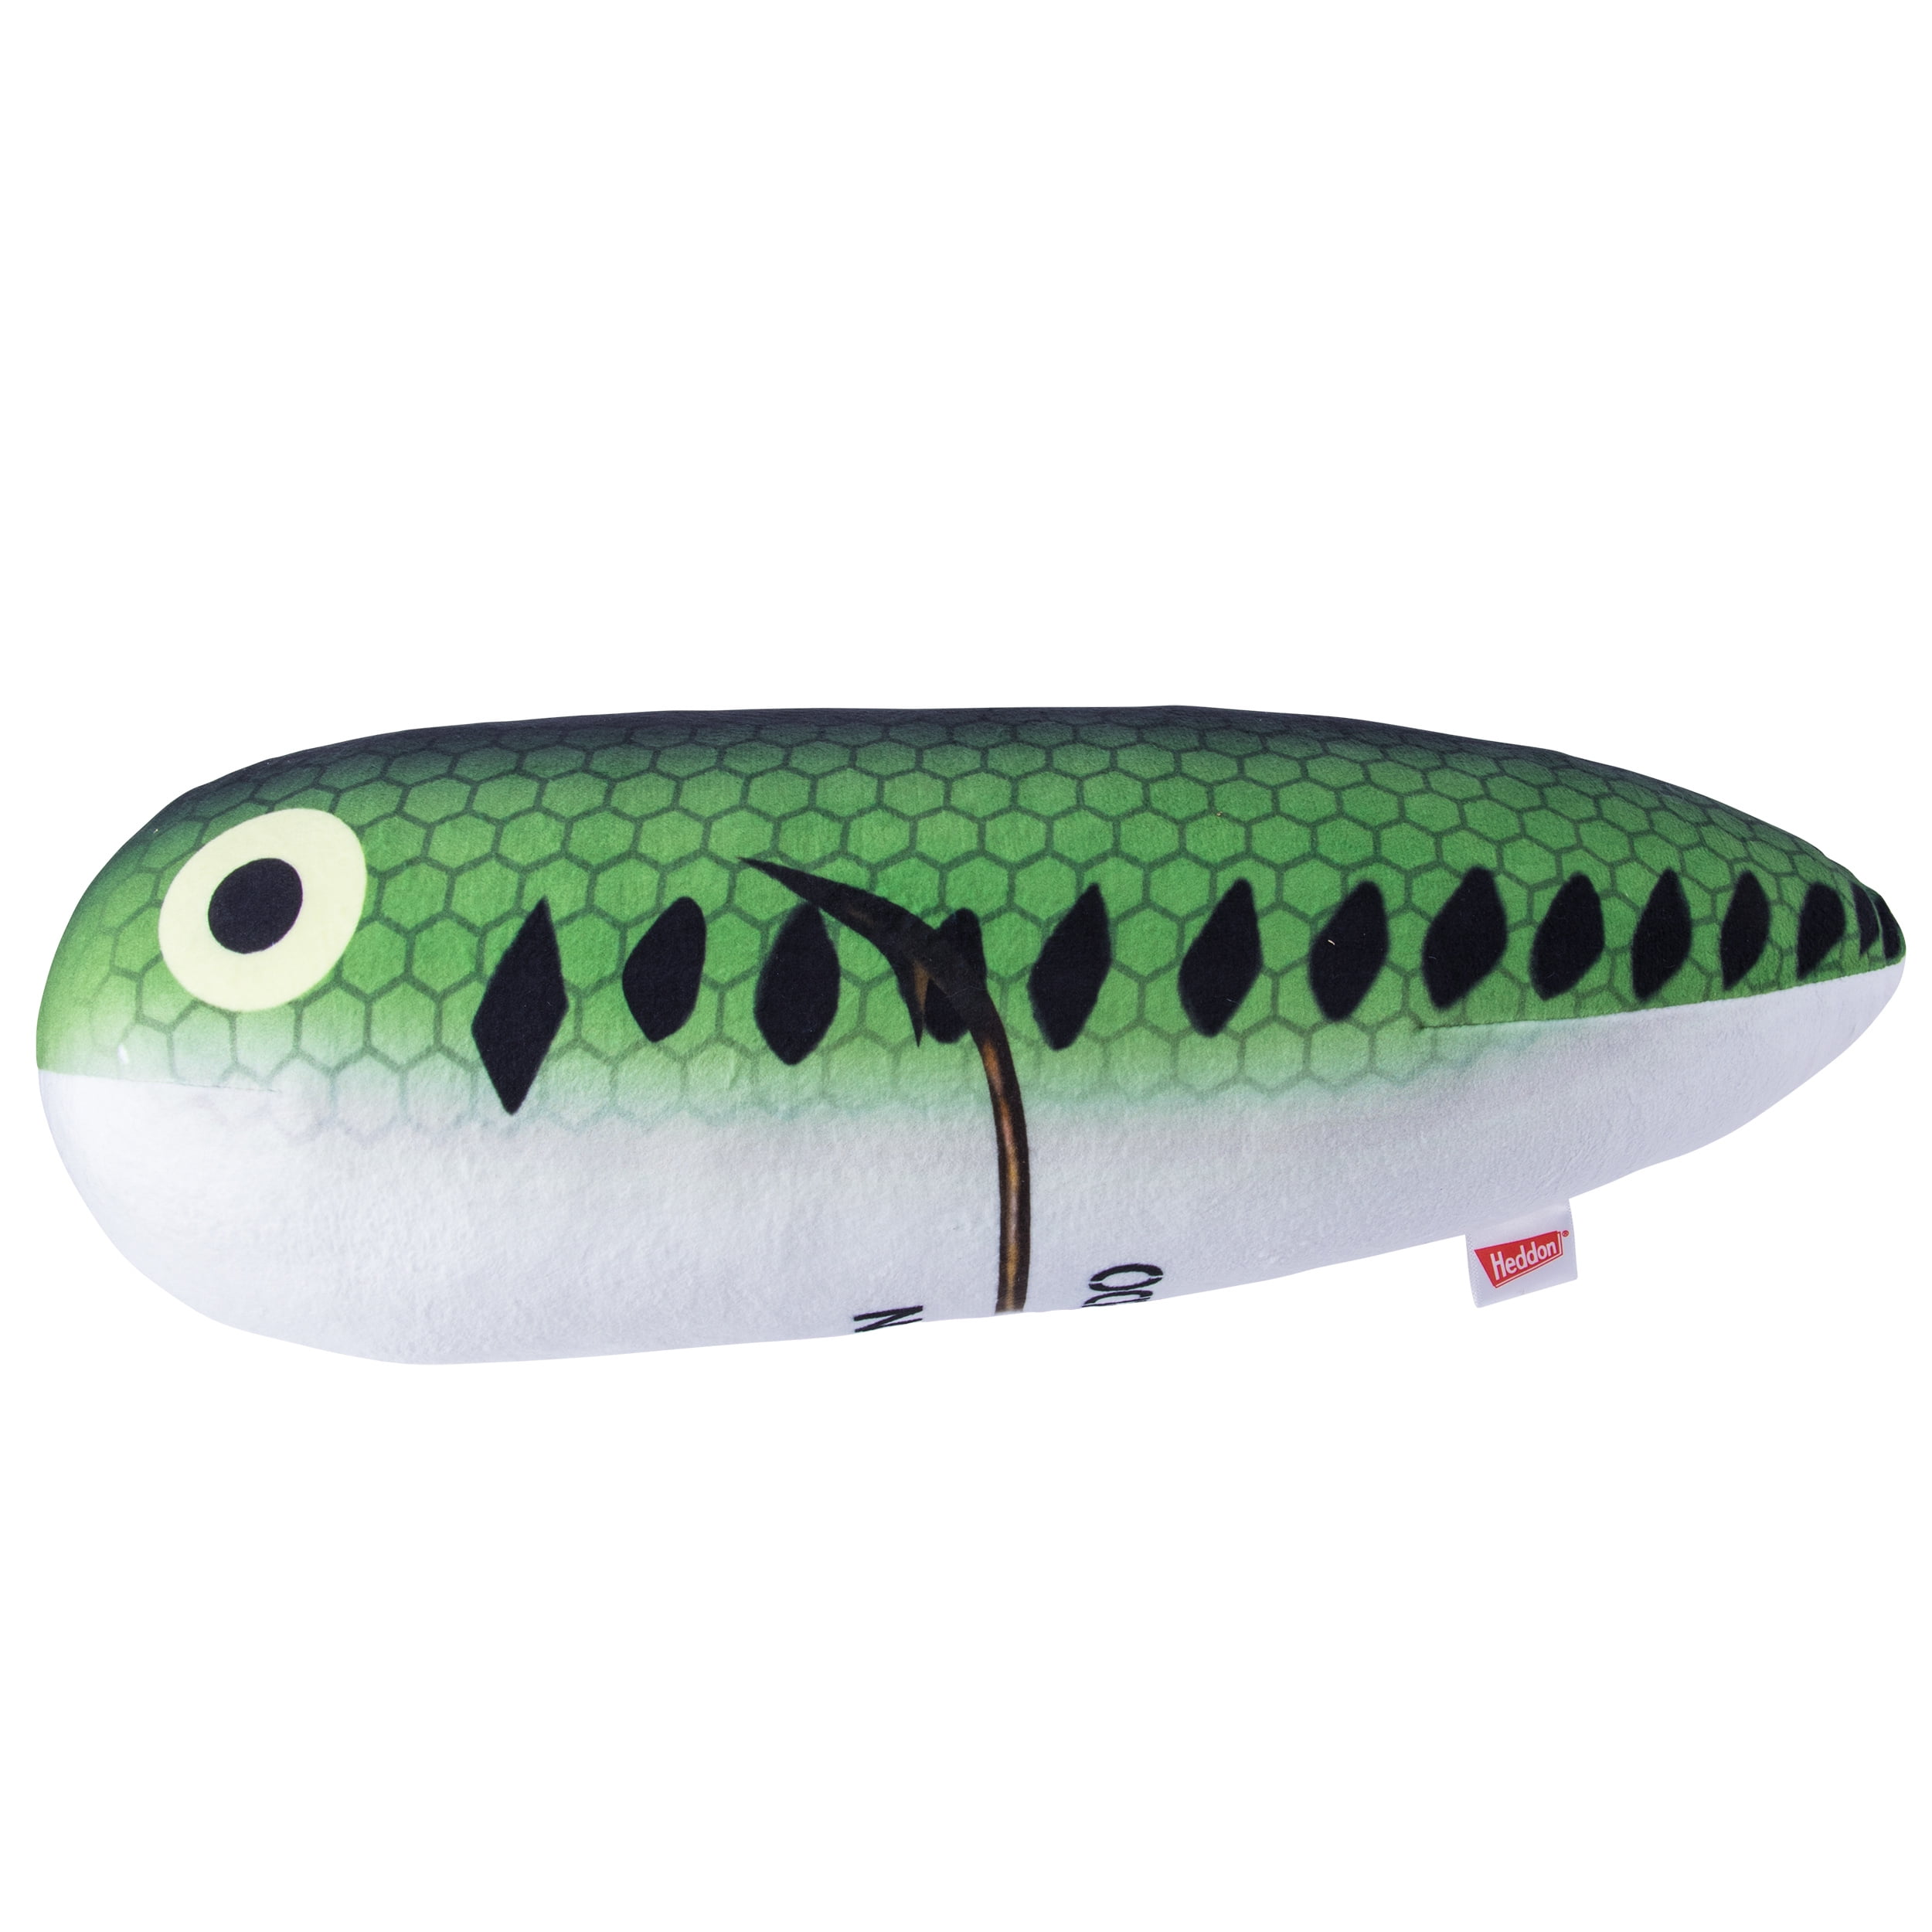 Paul Brown Original Series Fat Boy Corky Twitch Bait, Chartreuse Pearl 